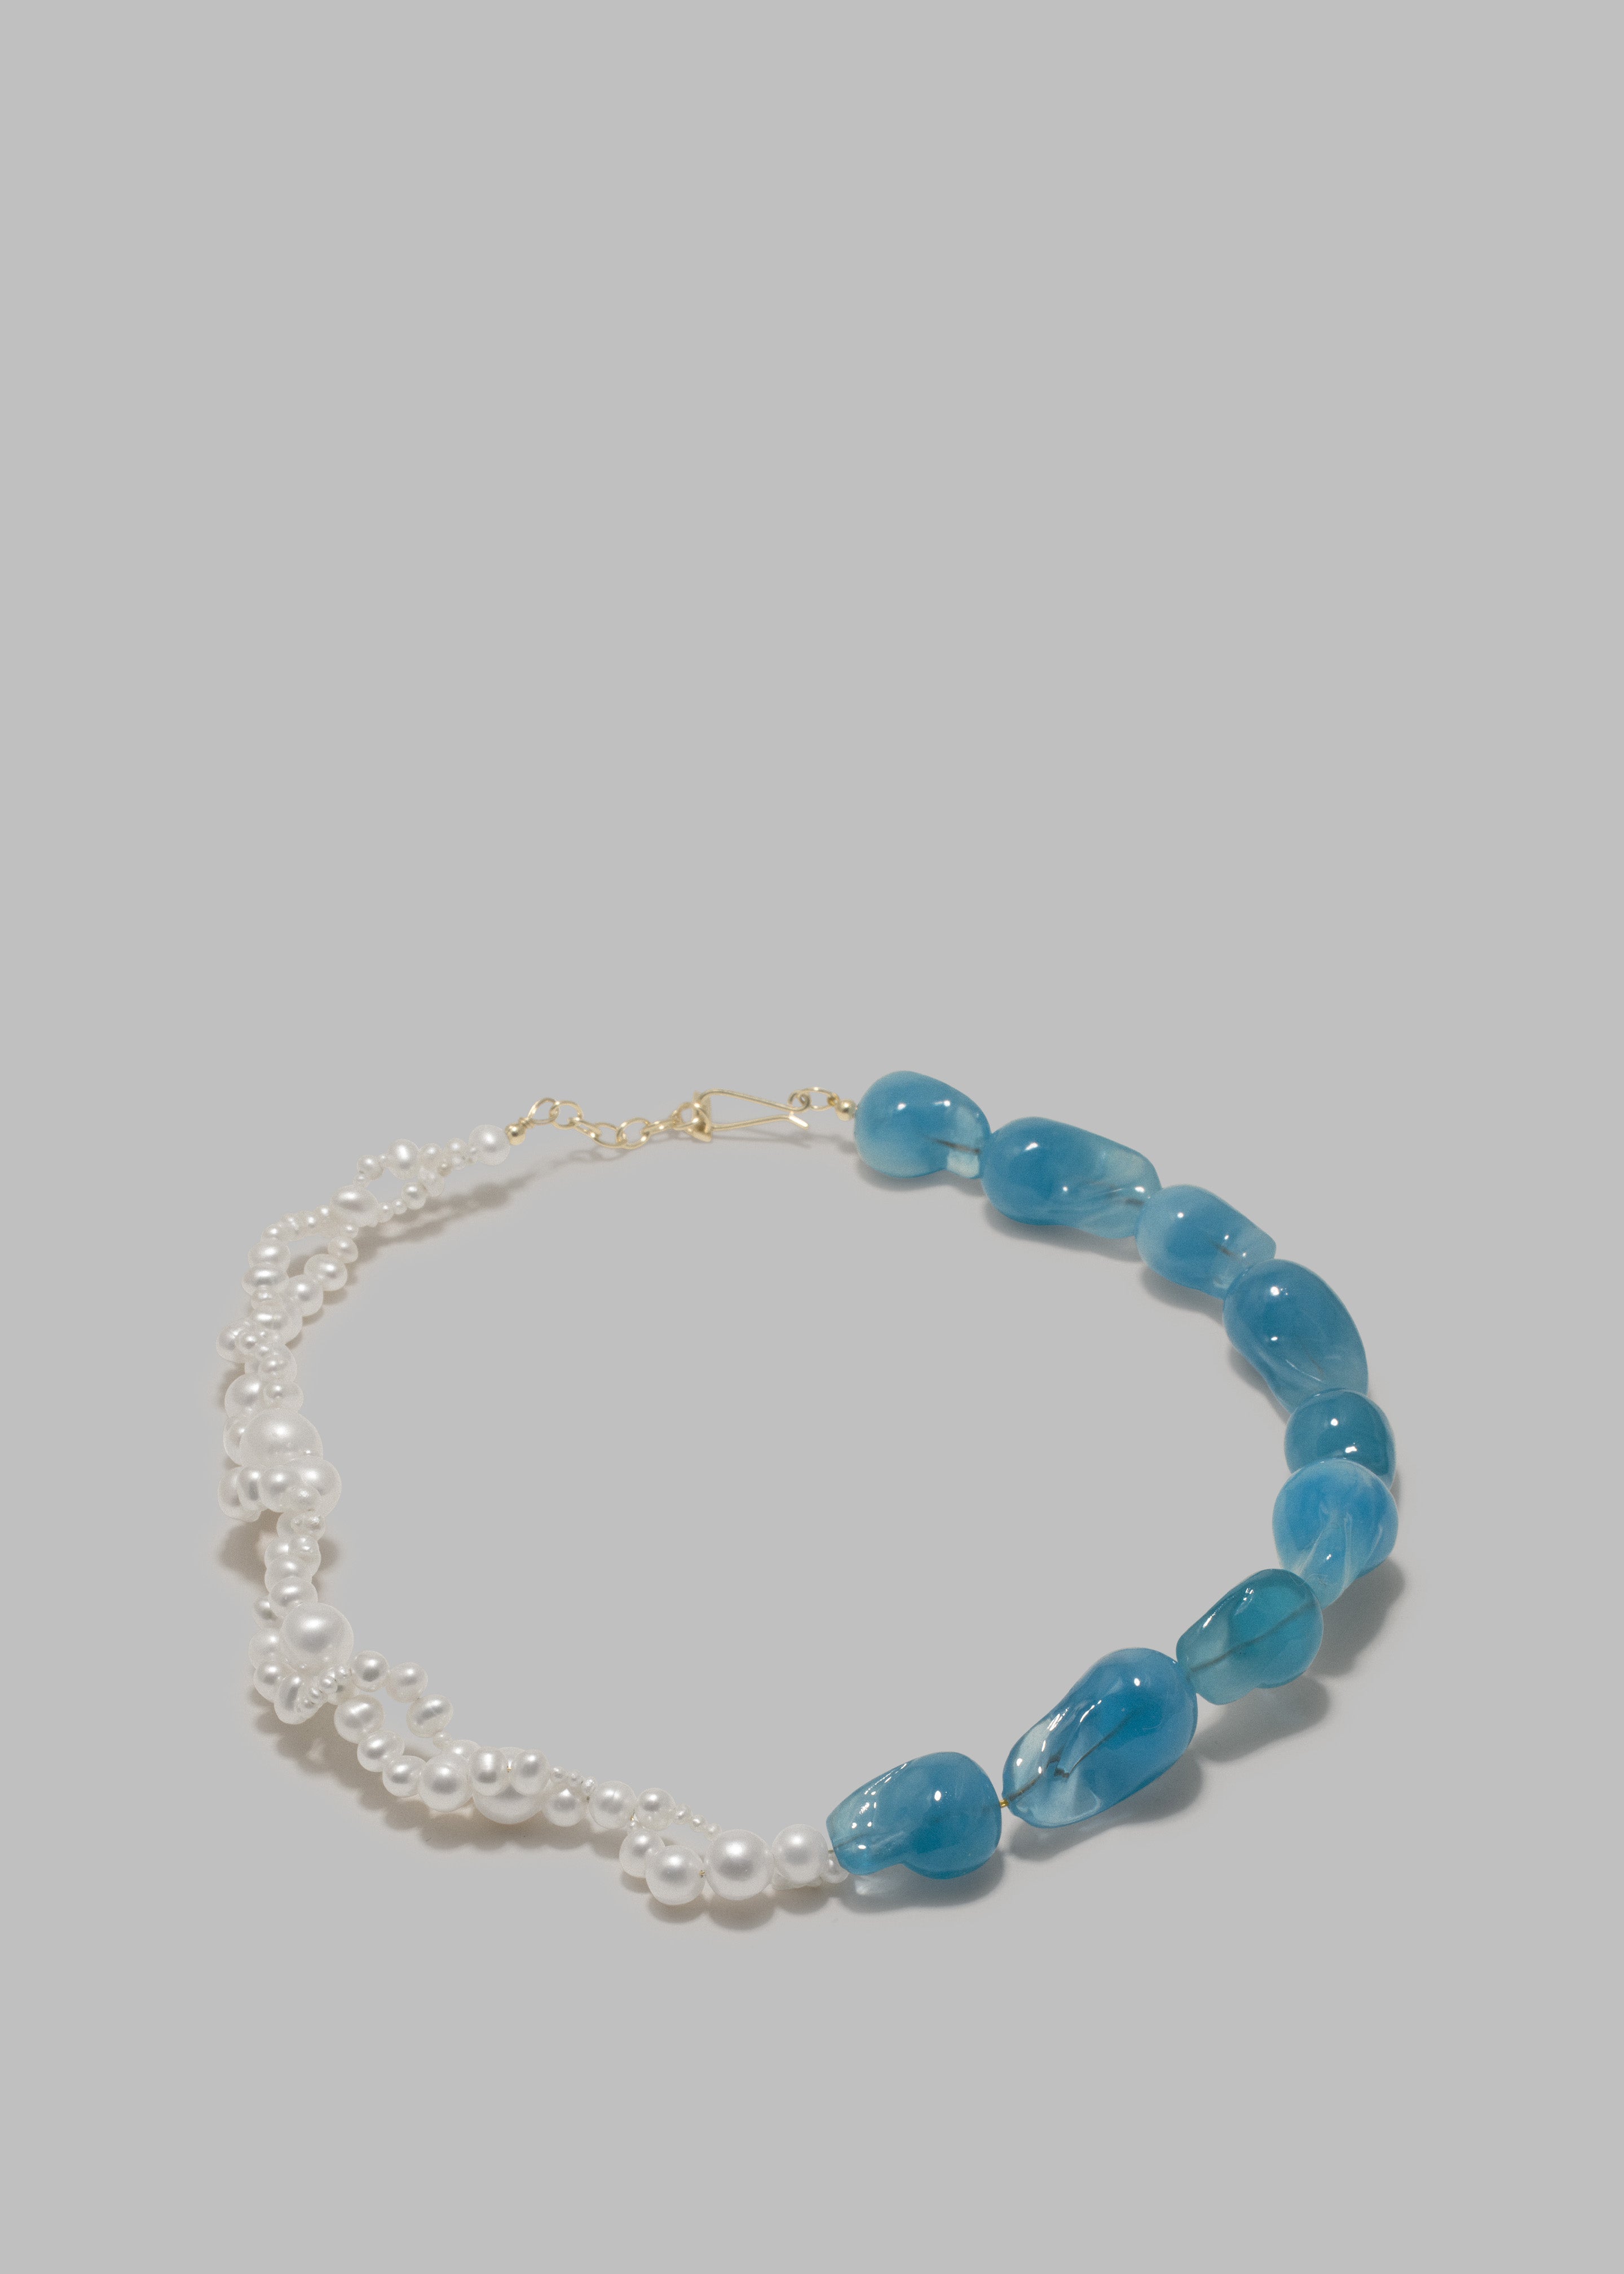 Completedworks Parade of Possibilities II Necklace - Pearl/Blue - 1